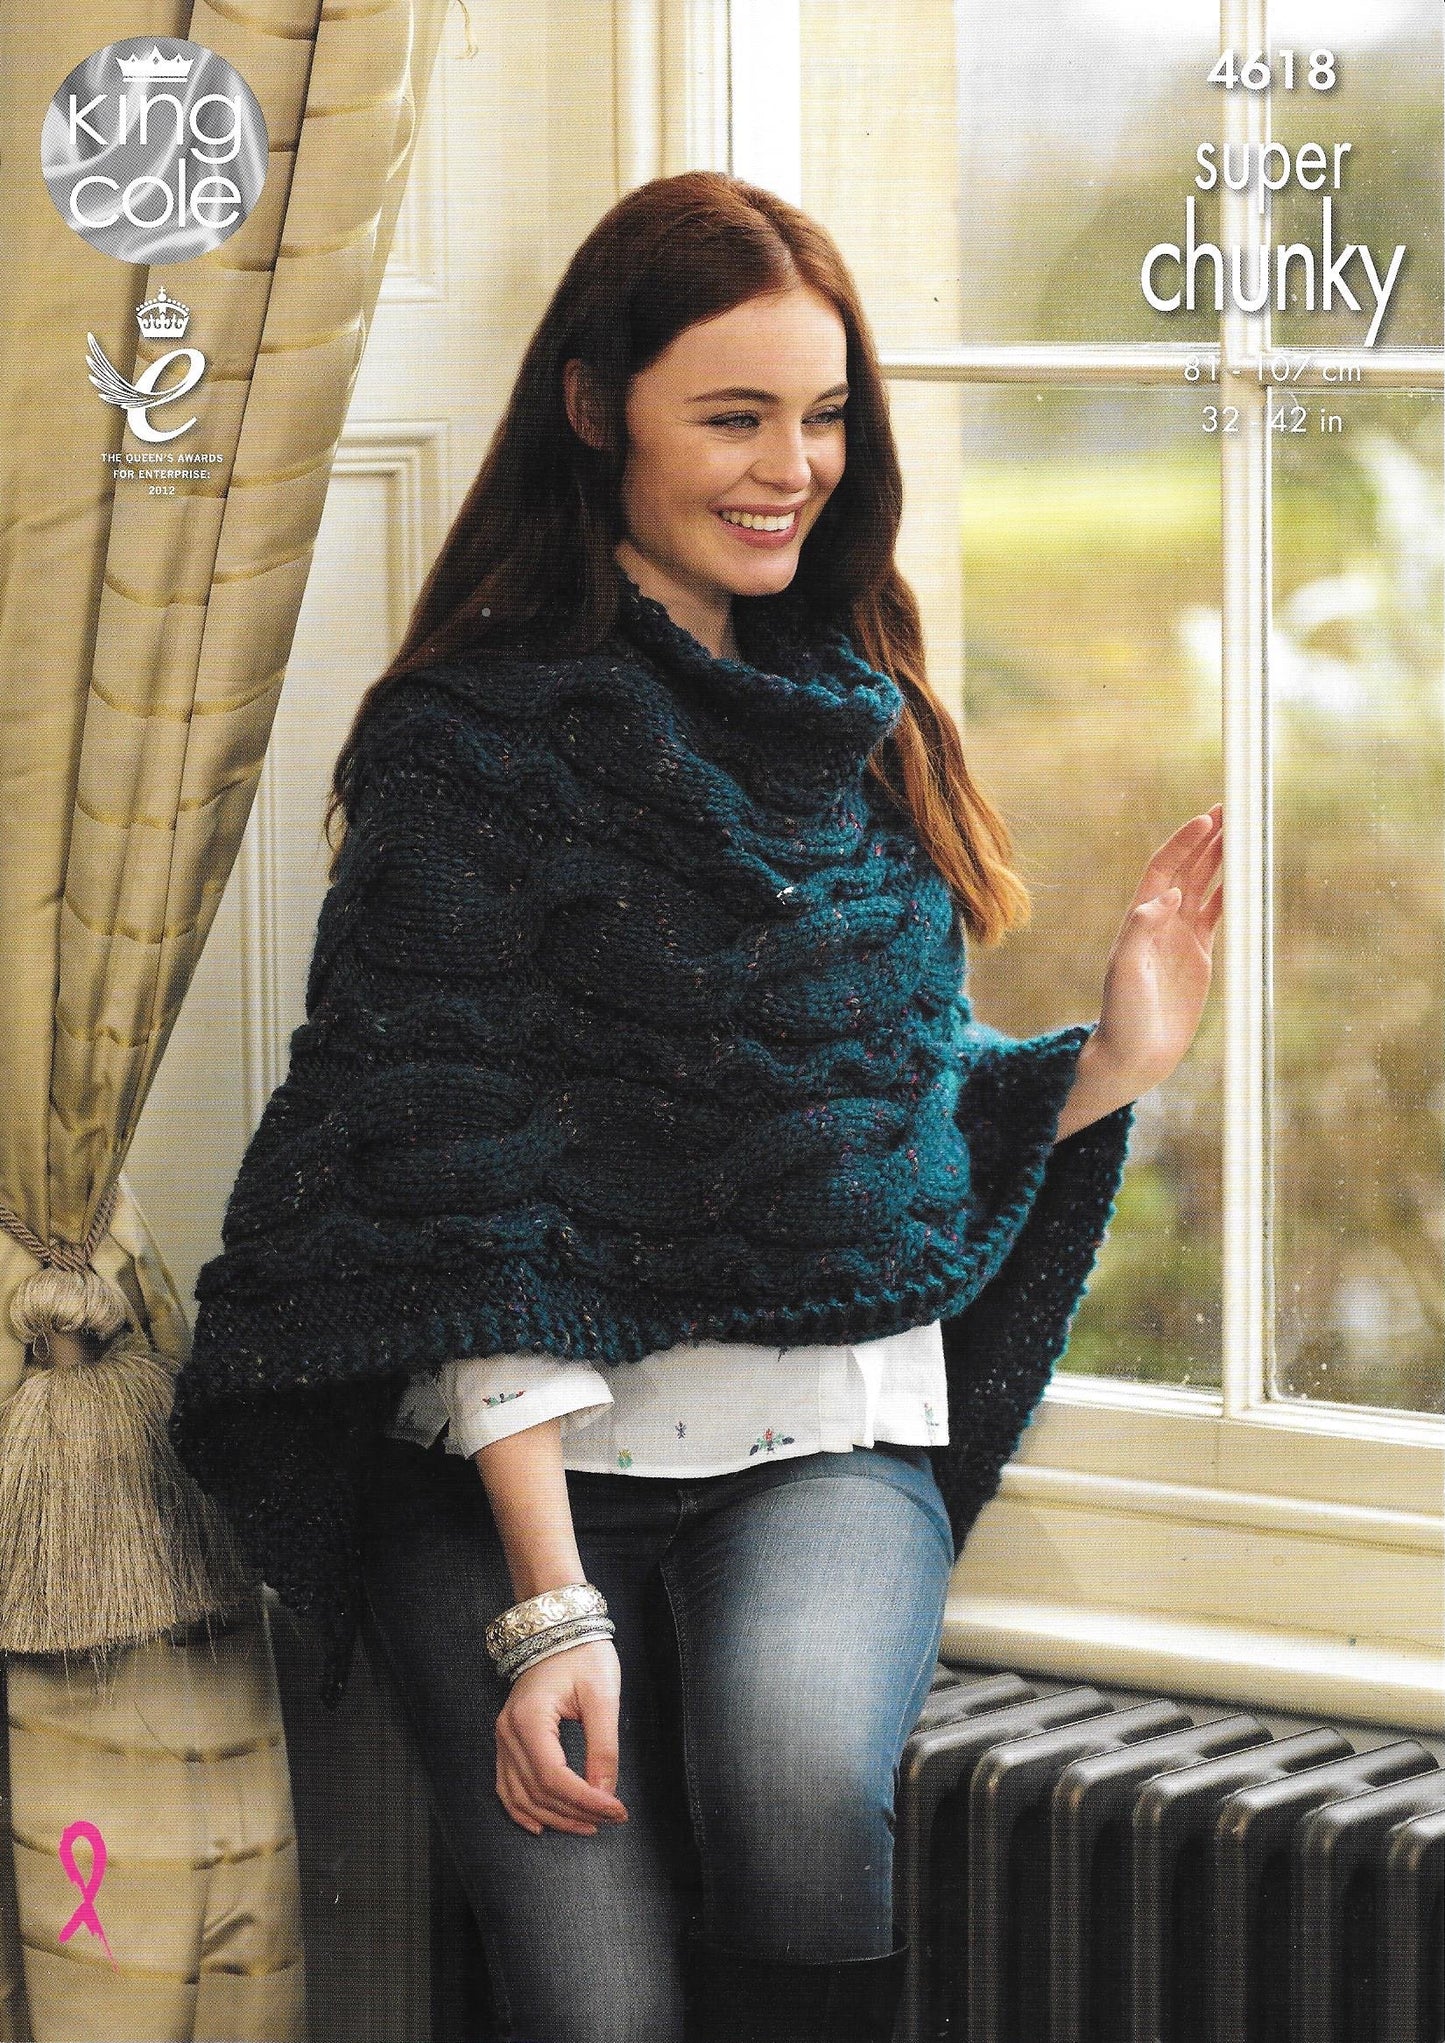 4618 King Cole super chunky ladies poncho and jumper knitting pattern